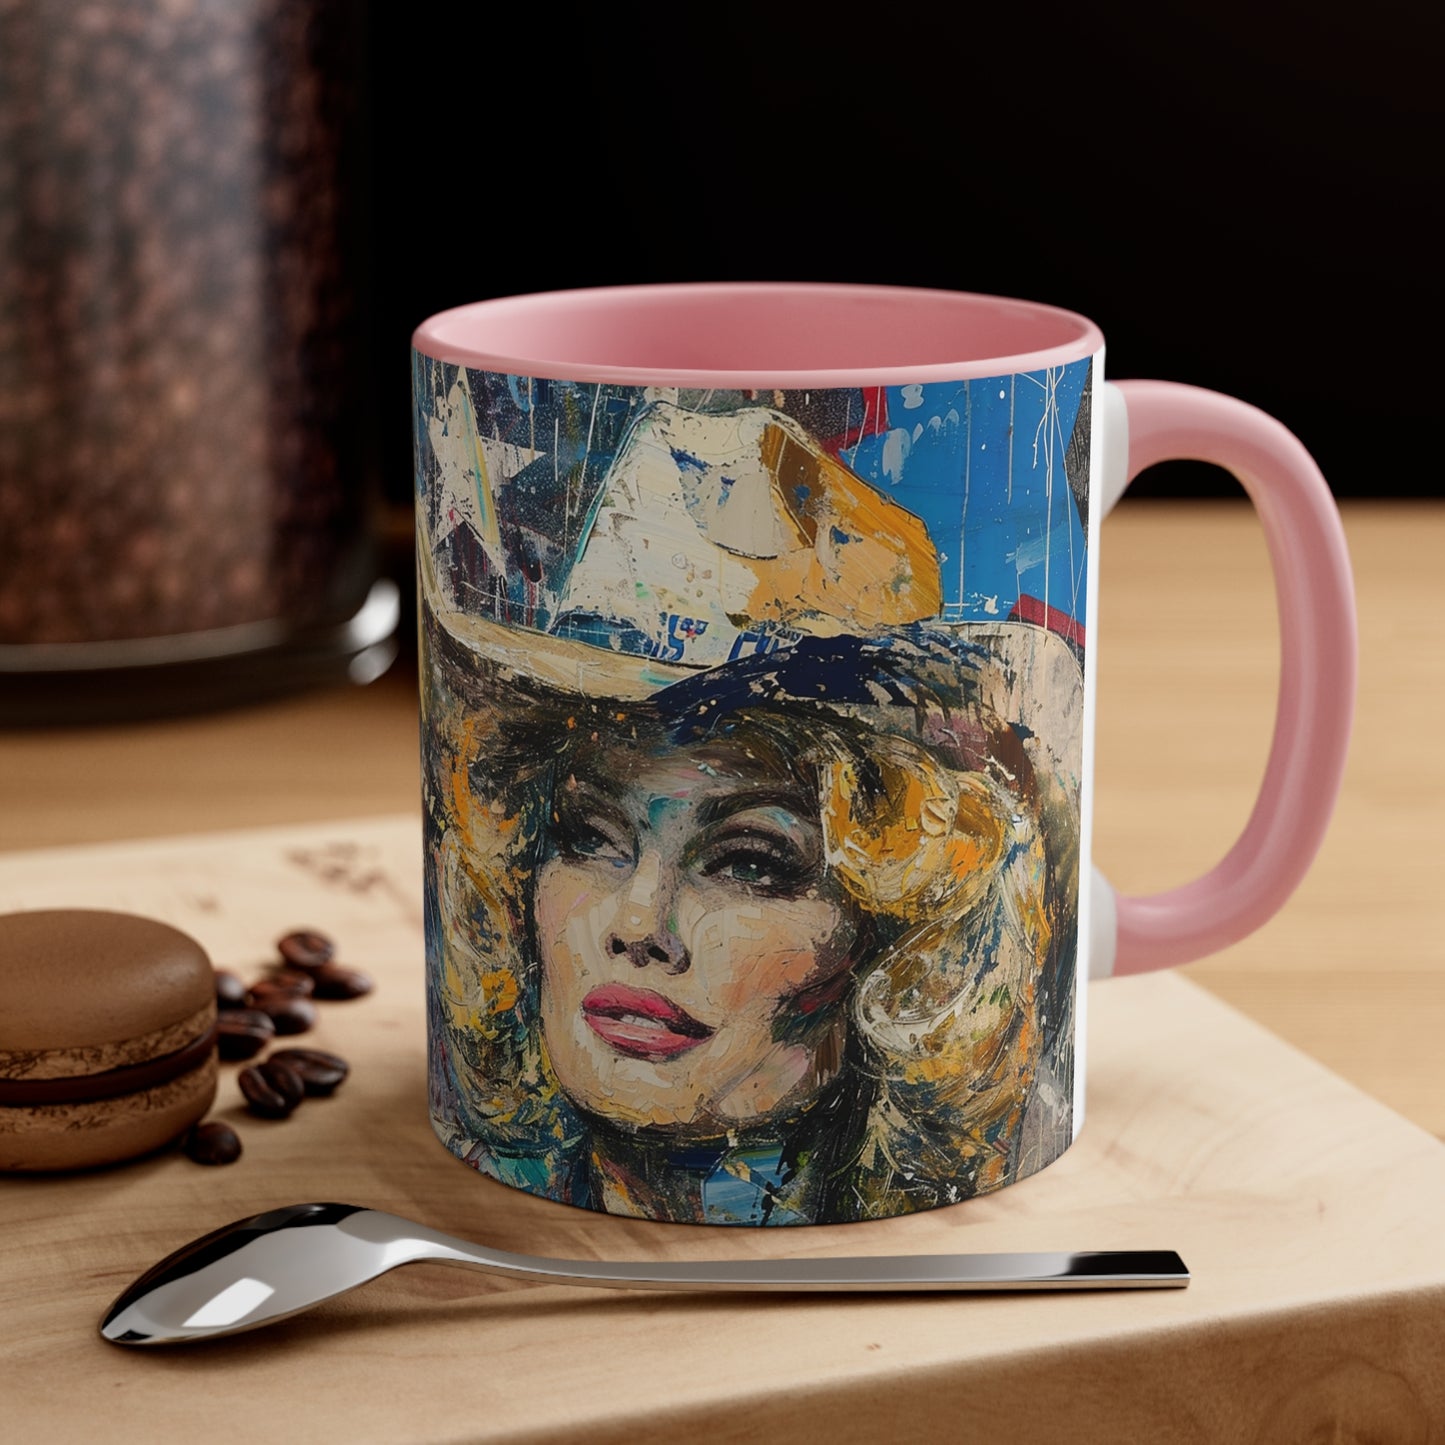 Accent Coffee Mug, 11oz - Country Queen pink